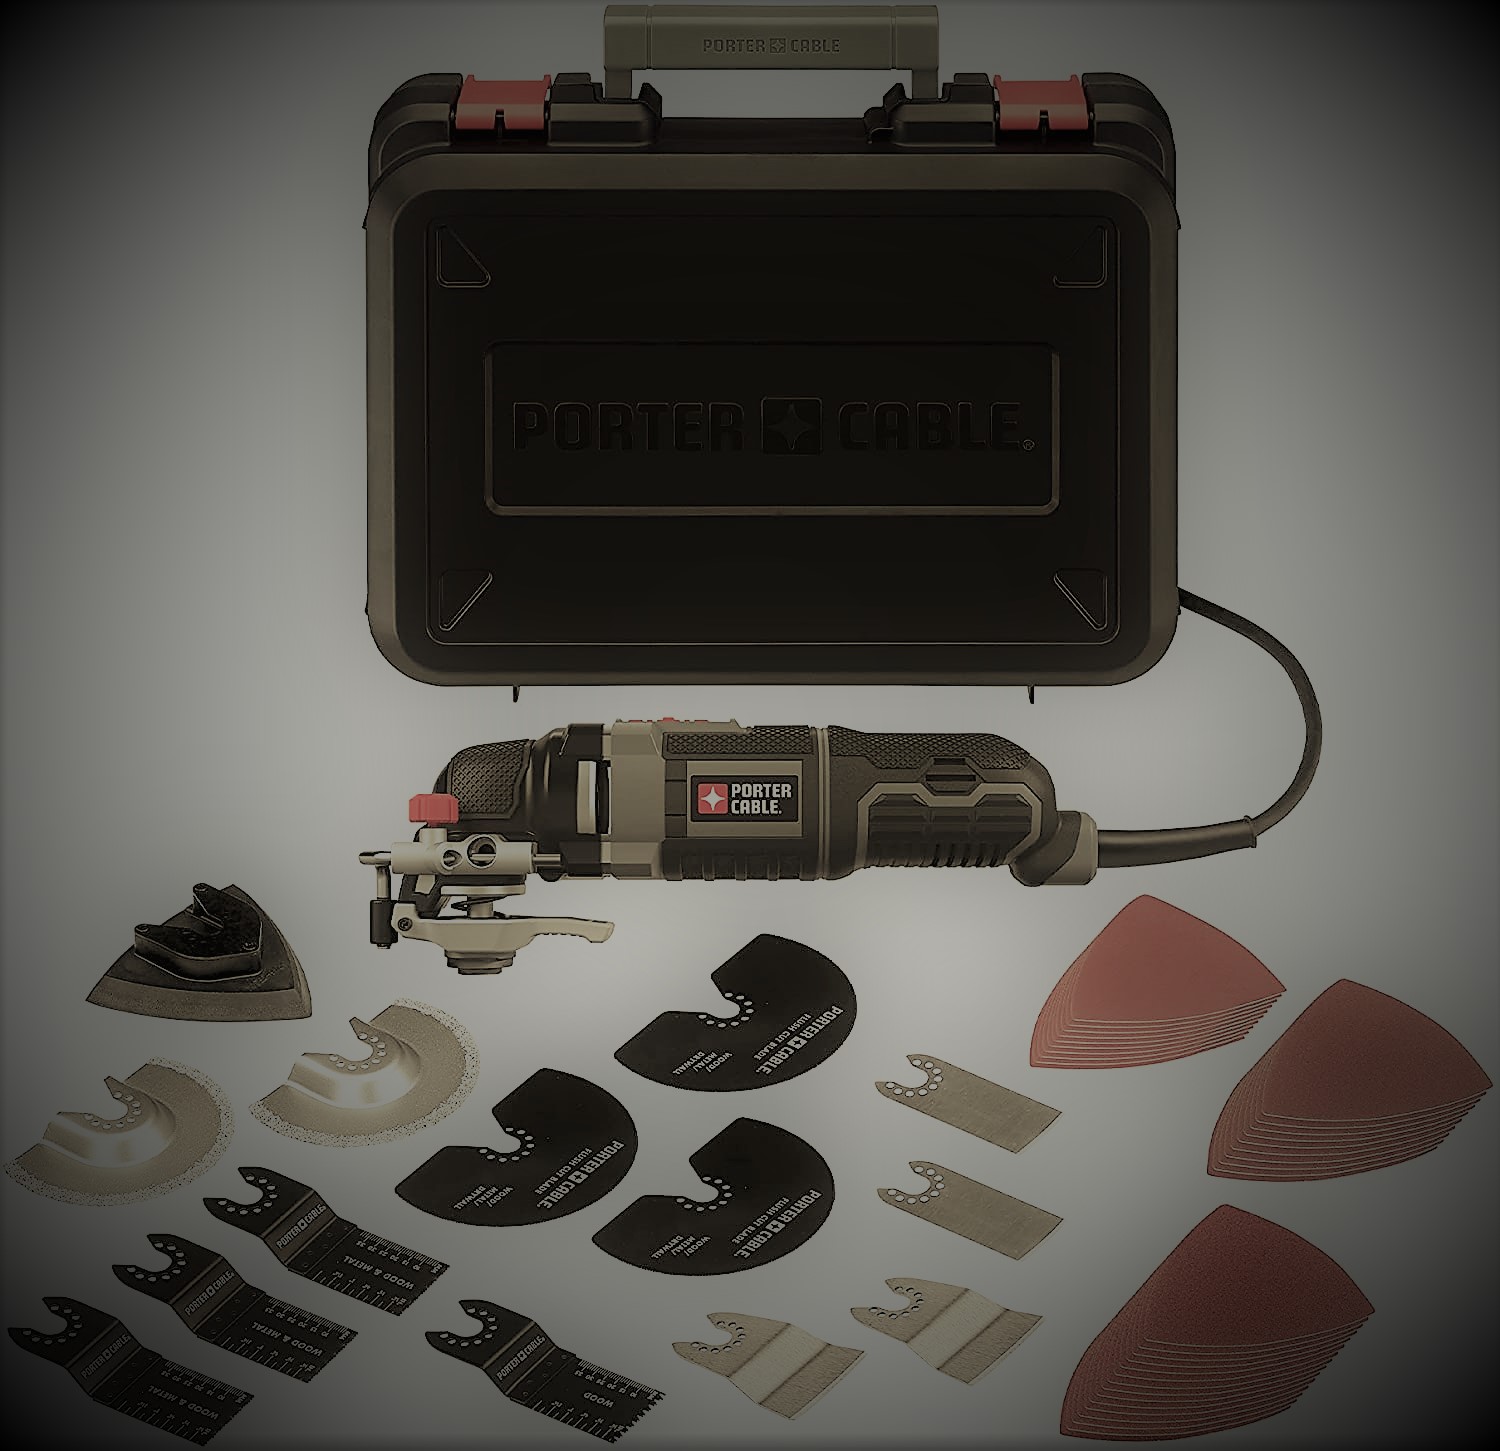 PORTER-CABLE PCE605K52 Oscillating Tool Kit